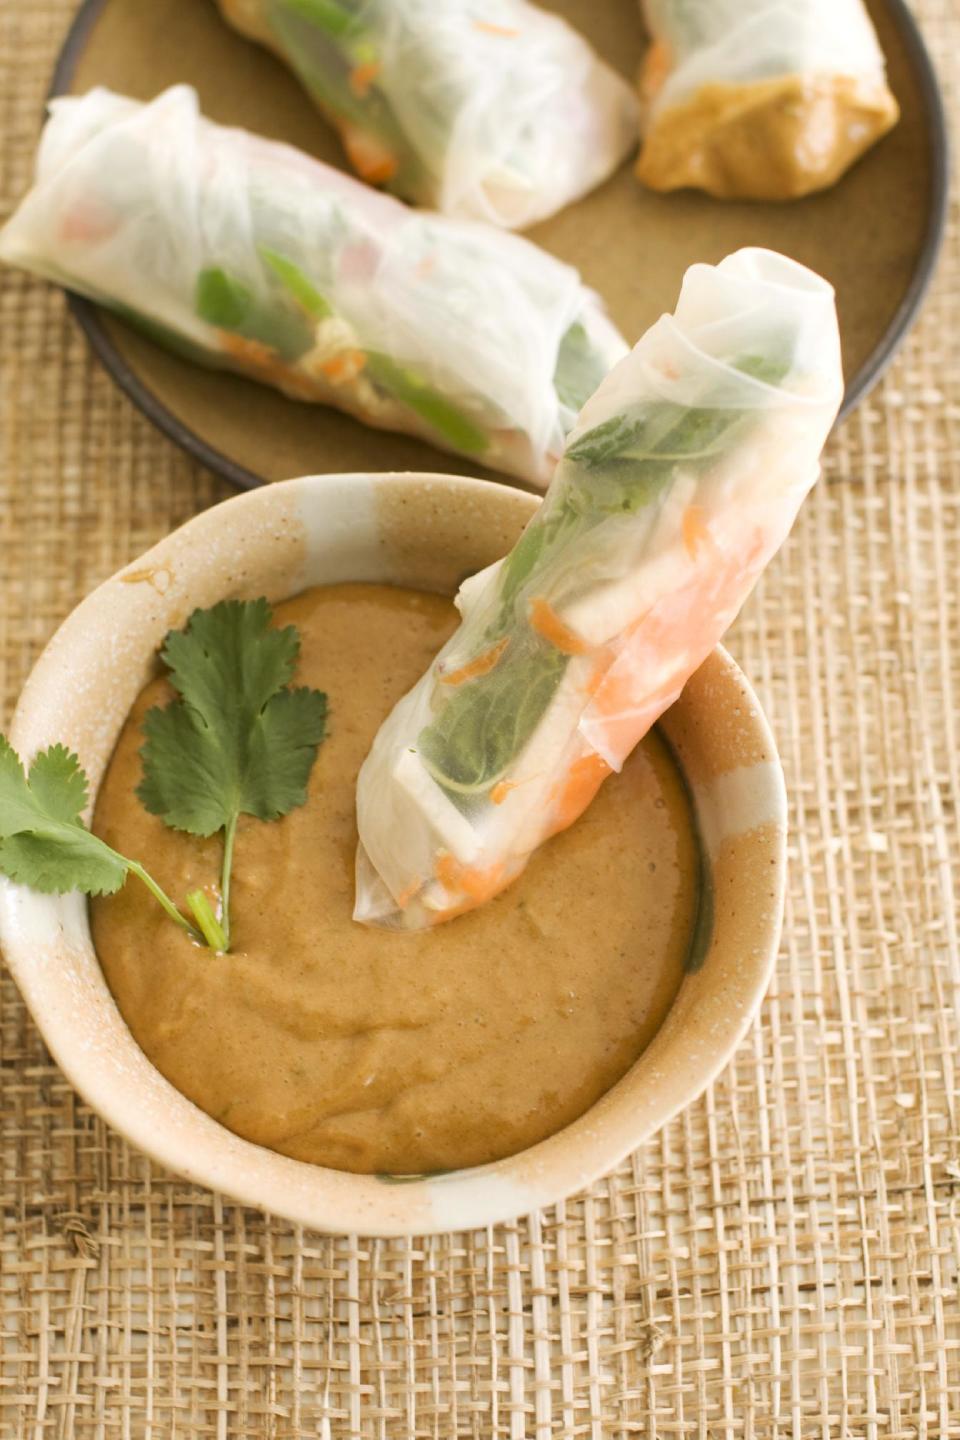 In this image taken on May 13, 2013, summer rolls with spicy peanut dipping sauce are shown served on a plate in Concord, NH. (AP Photo/Matthew Mead)